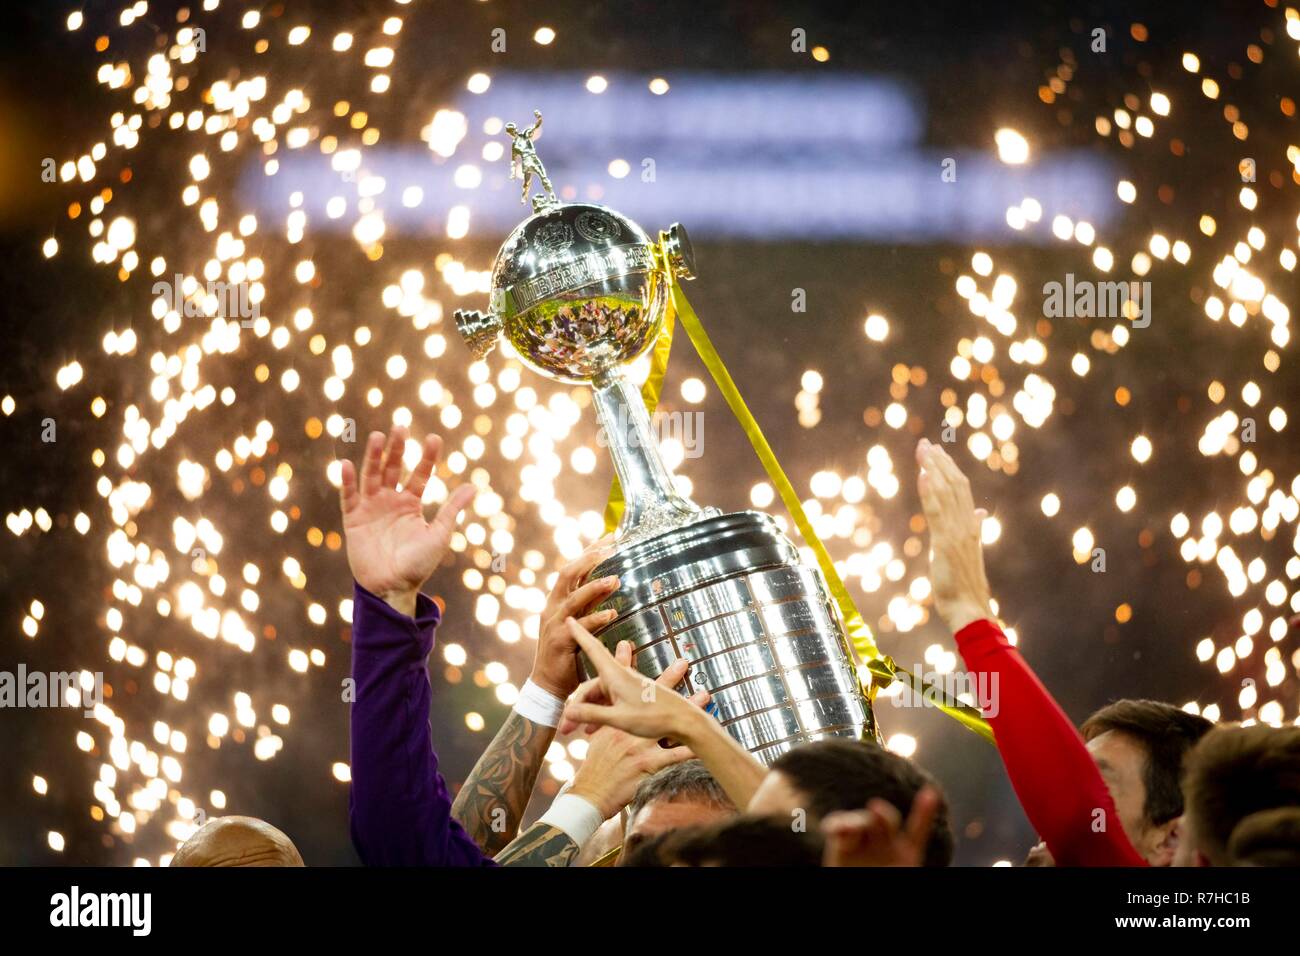 River Plate players celebrates victory in the Copa Libertadores final 2018/19 match between Boca Juniors and River Plate, at Santiago Bernabeu Stadium in Madrid on December 9, 2018. (Photo by Guille Martinez/Cordon Press)  Cordon Press Stock Photo